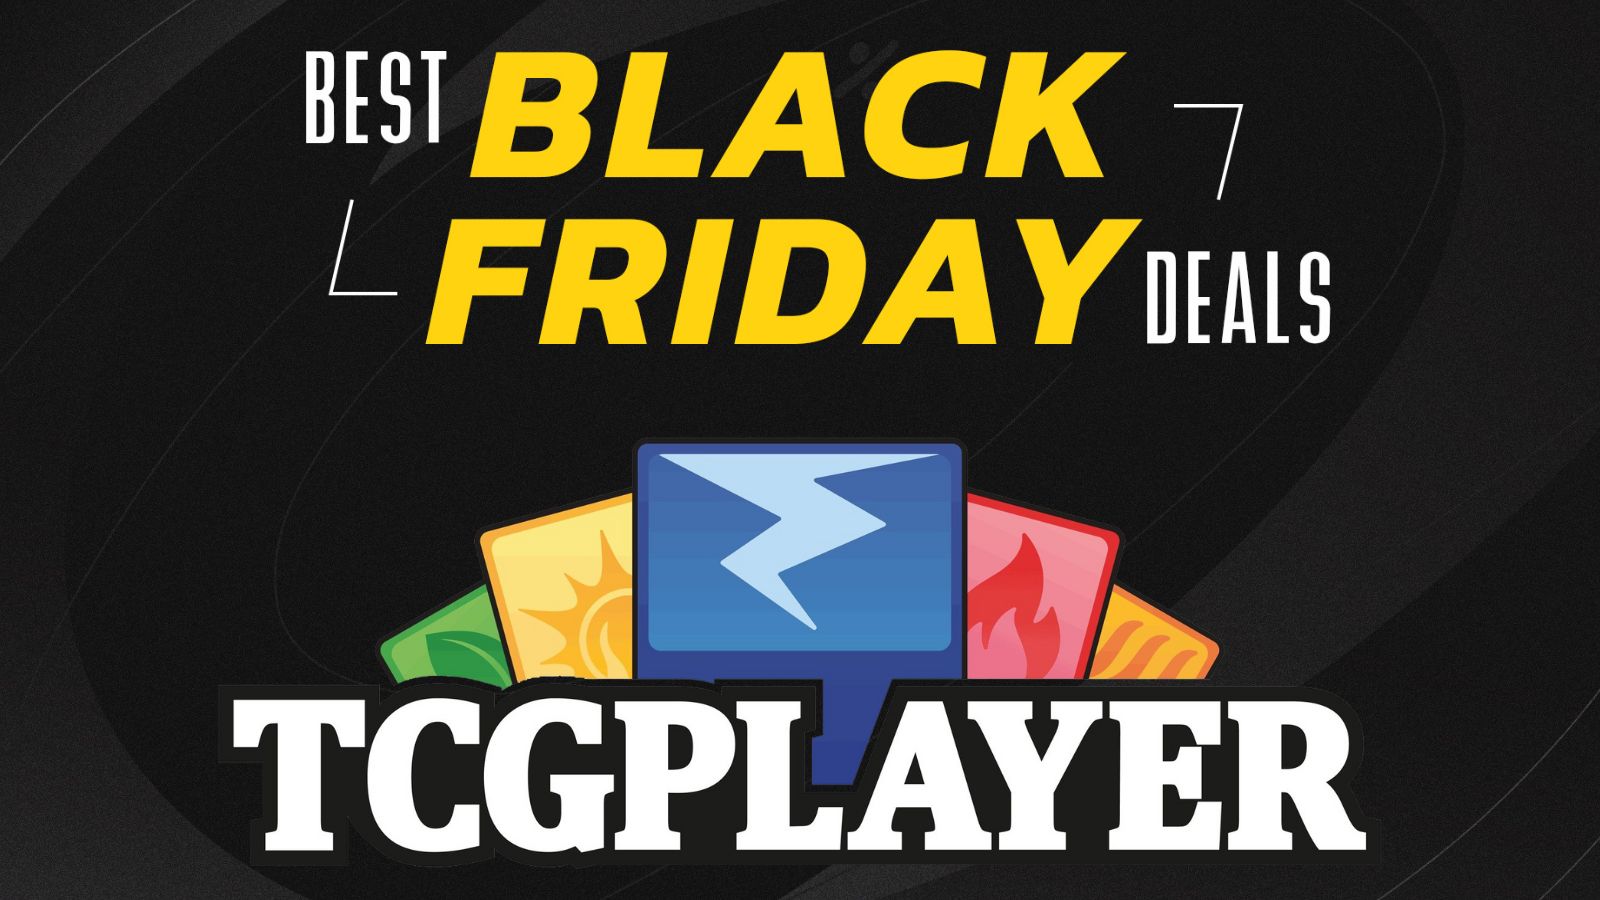 TCGPlayer Black Friday deal offers 15 credit on Pokemon, YuGiOh